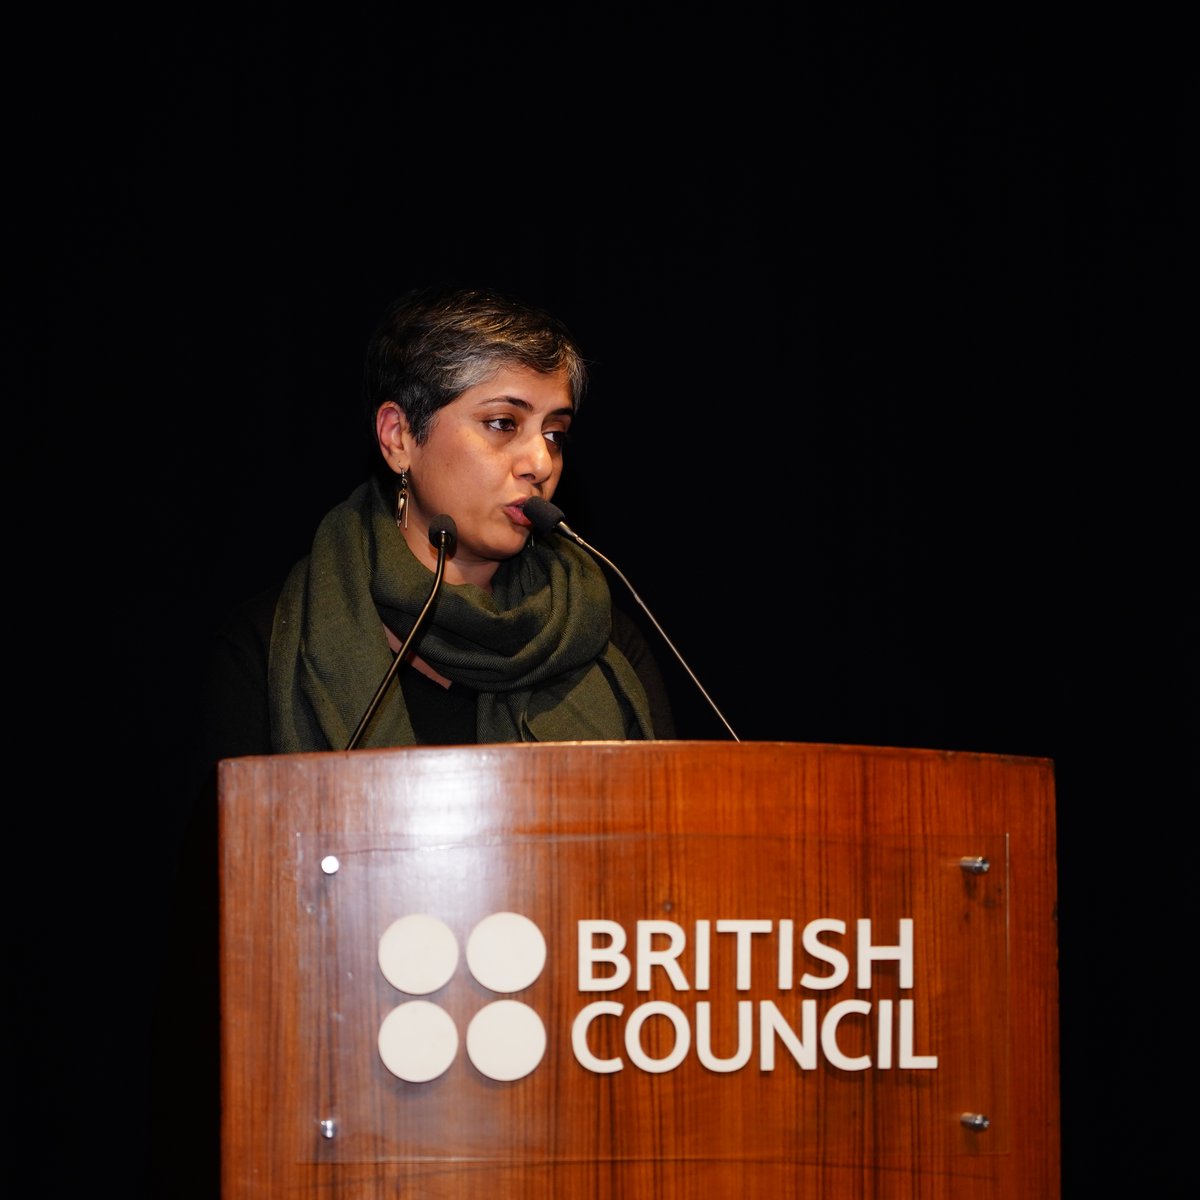 ⭐️Spotlight on Latika Gupta, curator of our current exhibition, a collaboration w/@inBritish Poetics of the Real and the Imagined.
.
Latika was a @SOAS research fellow (2017) on a @CW_IndiaTrust Fellowship 👏
.
More here: bit.ly/CWITPoetics
#IndiaUKTogether #SeasonofCulture